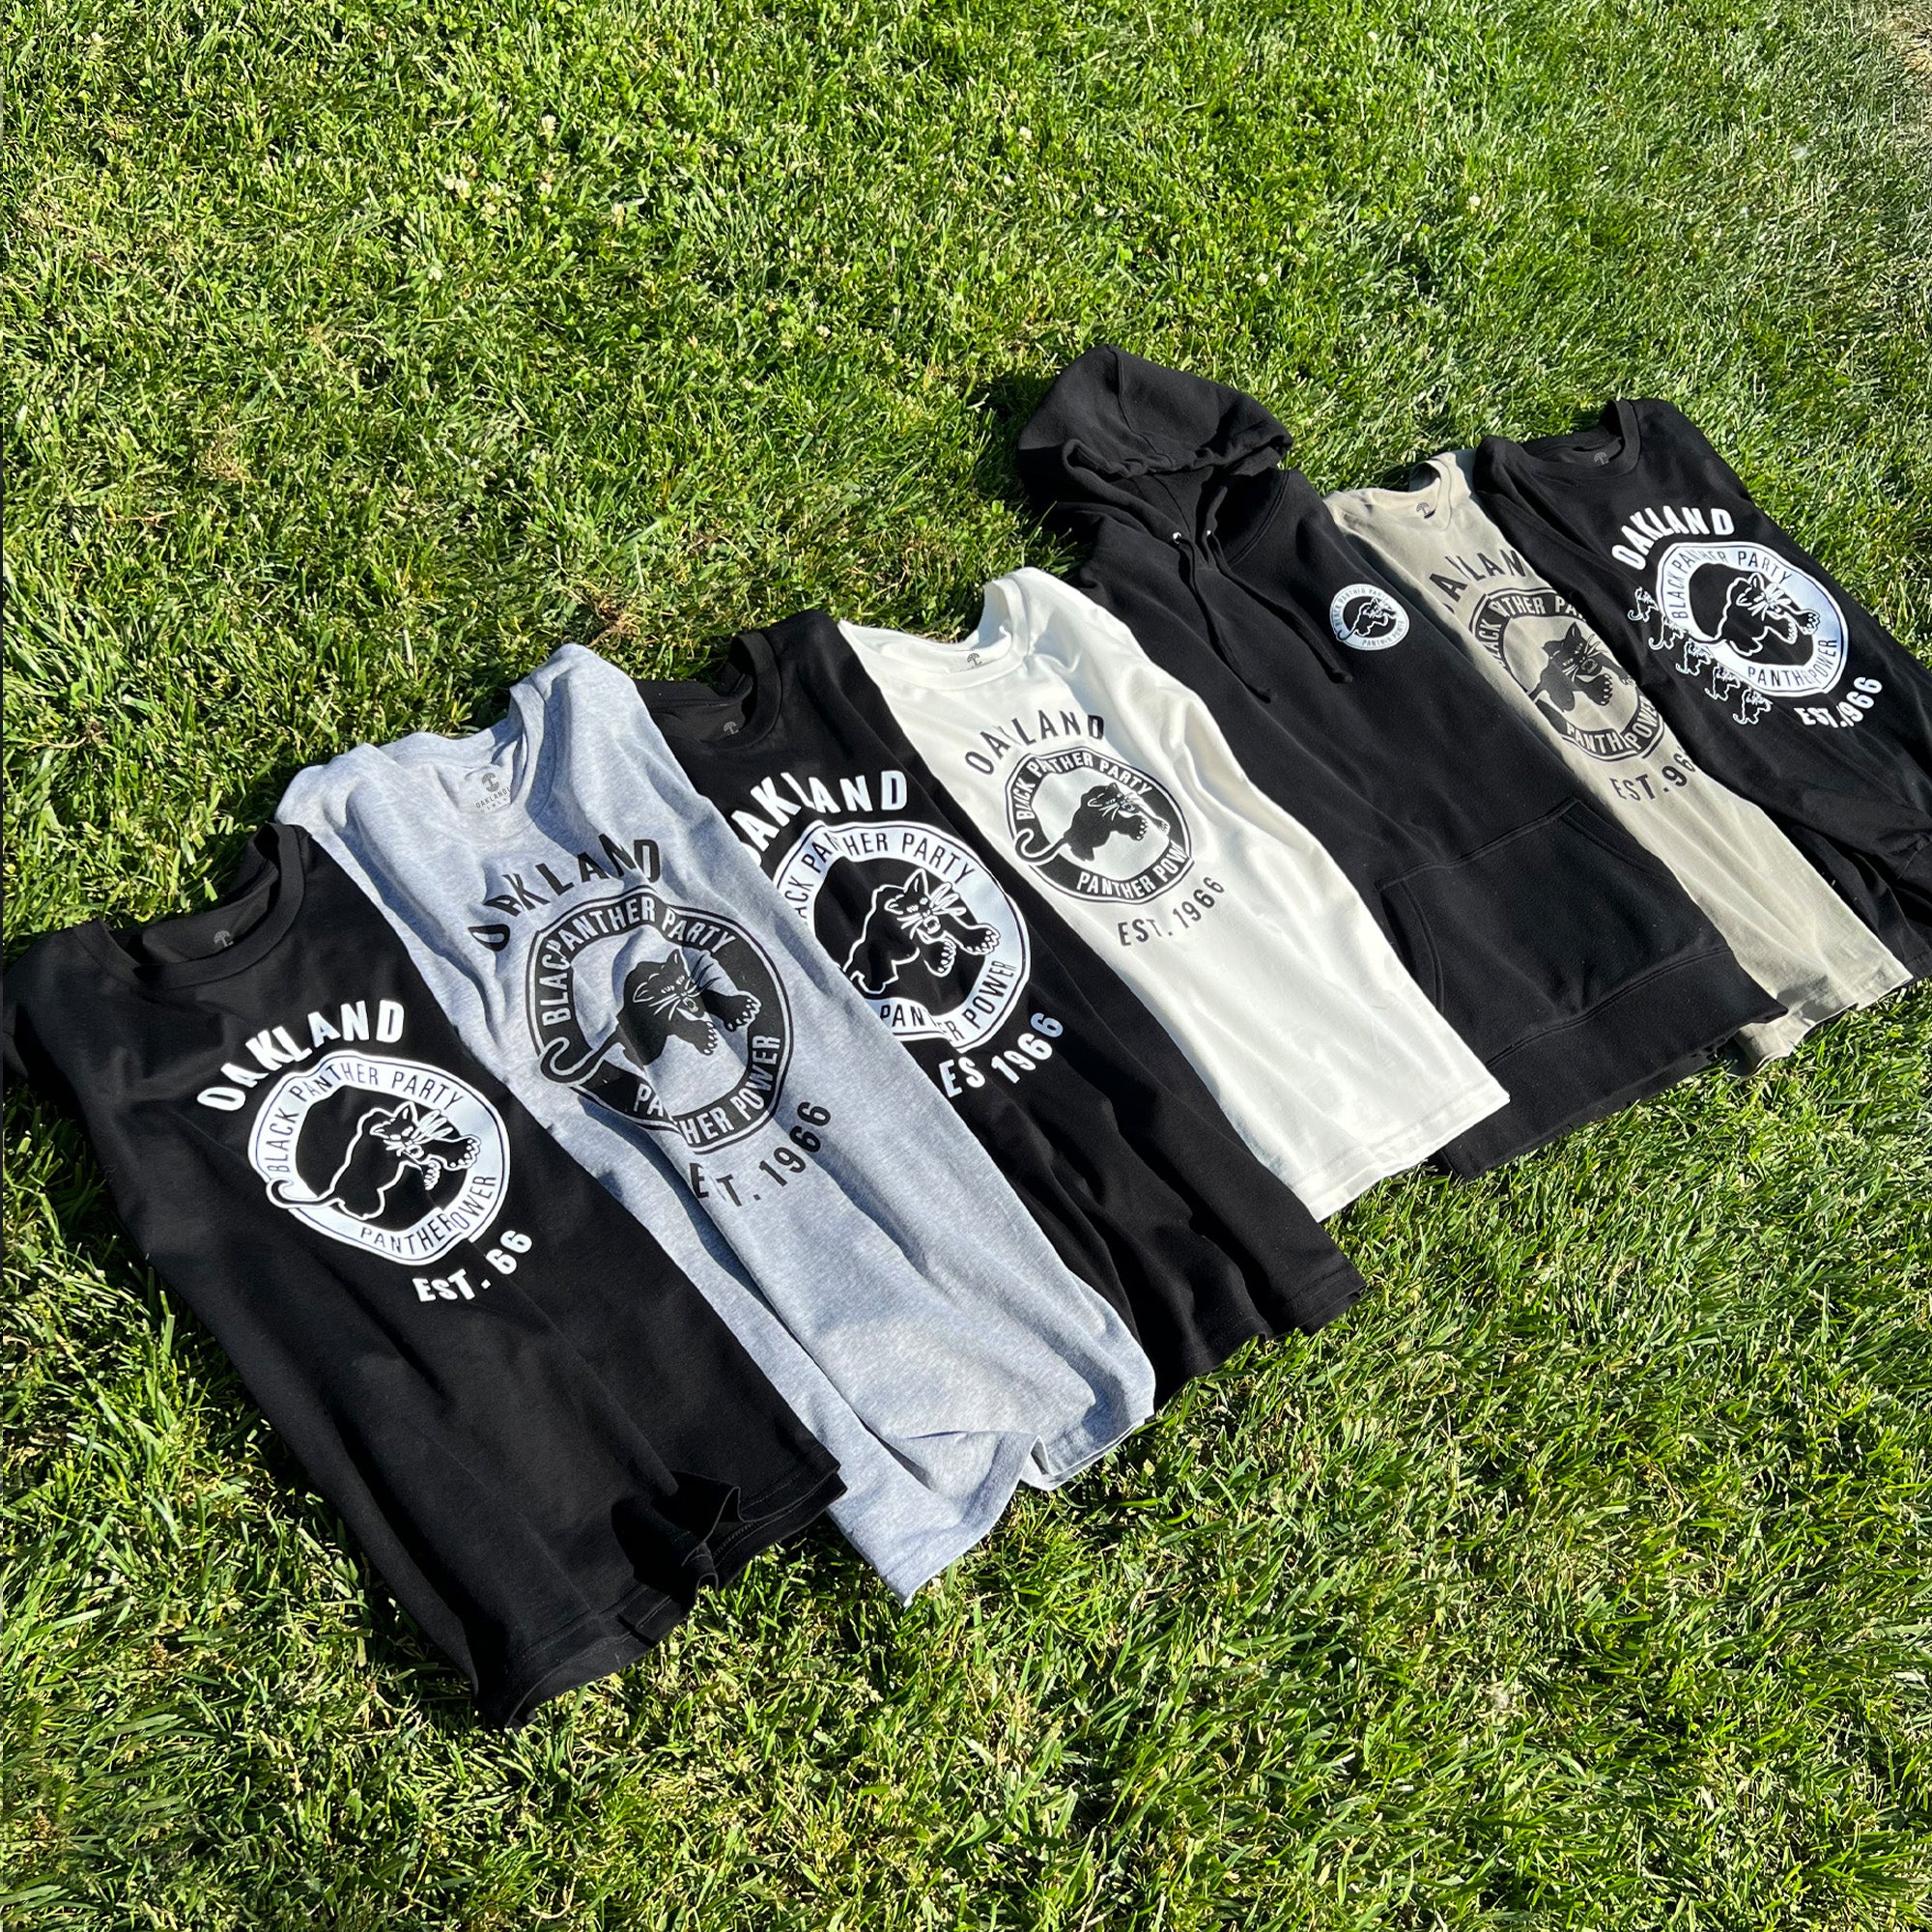 Seven items in Black Panther Party Alumni Legacy Network t-shirt & hoodie collection outside lying on grass.